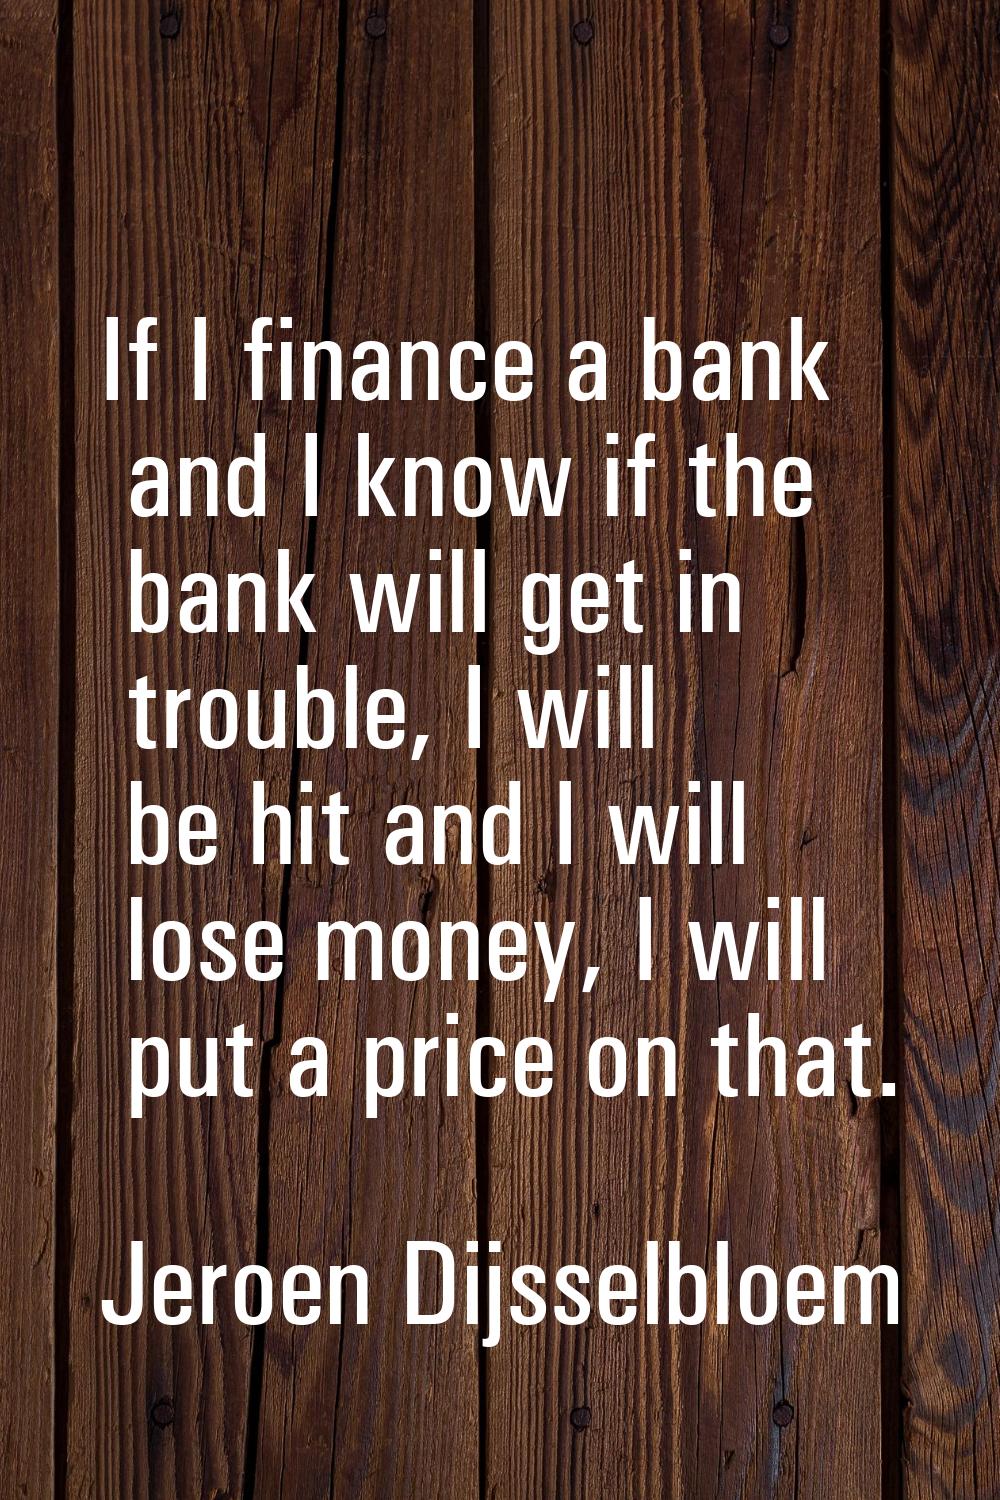 If I finance a bank and I know if the bank will get in trouble, I will be hit and I will lose money